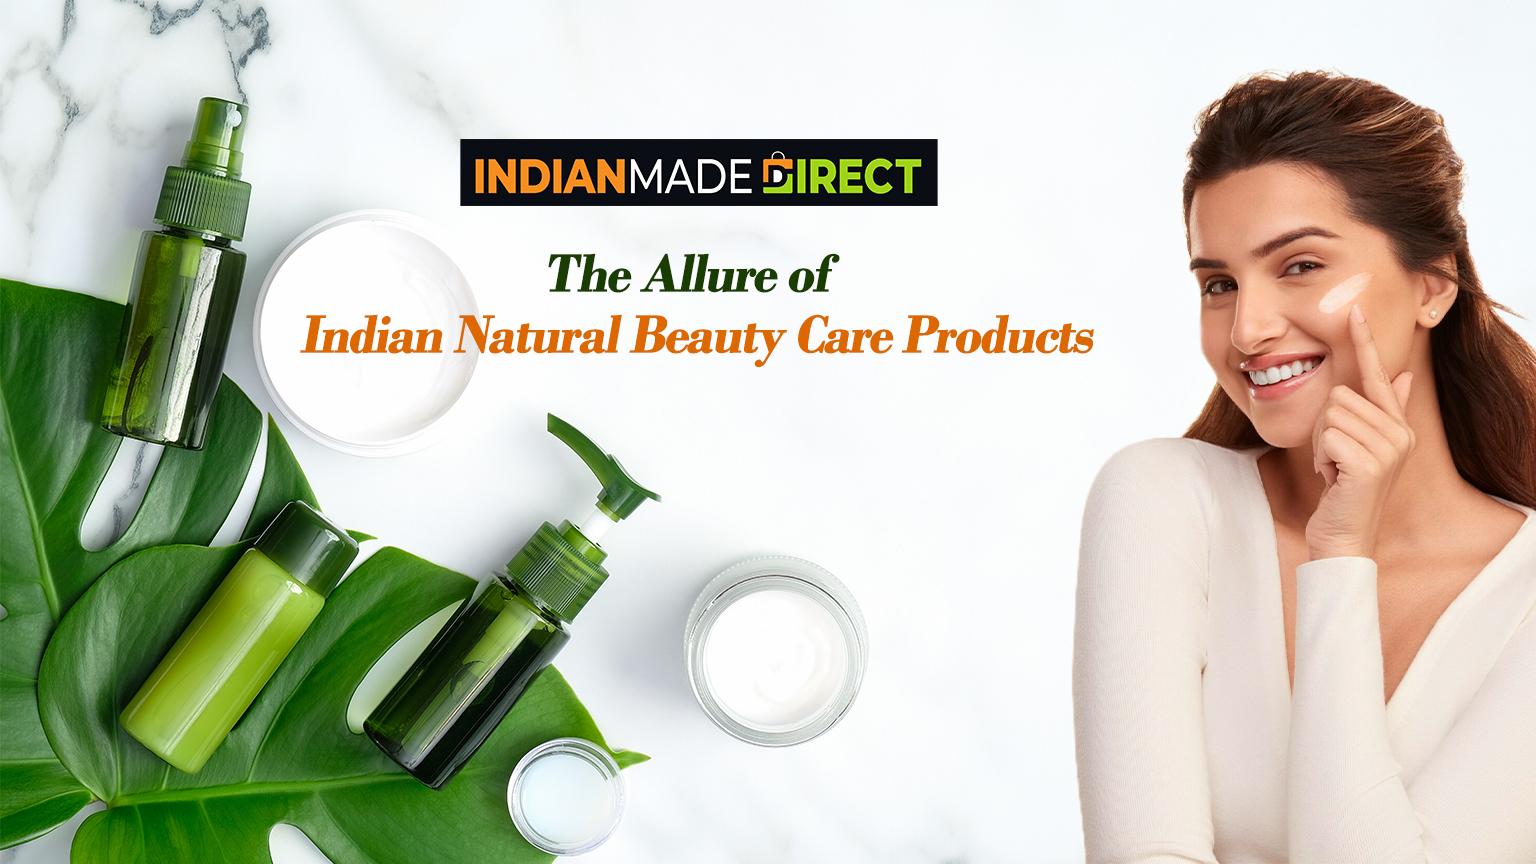 Indian Natural Beauty Care Products